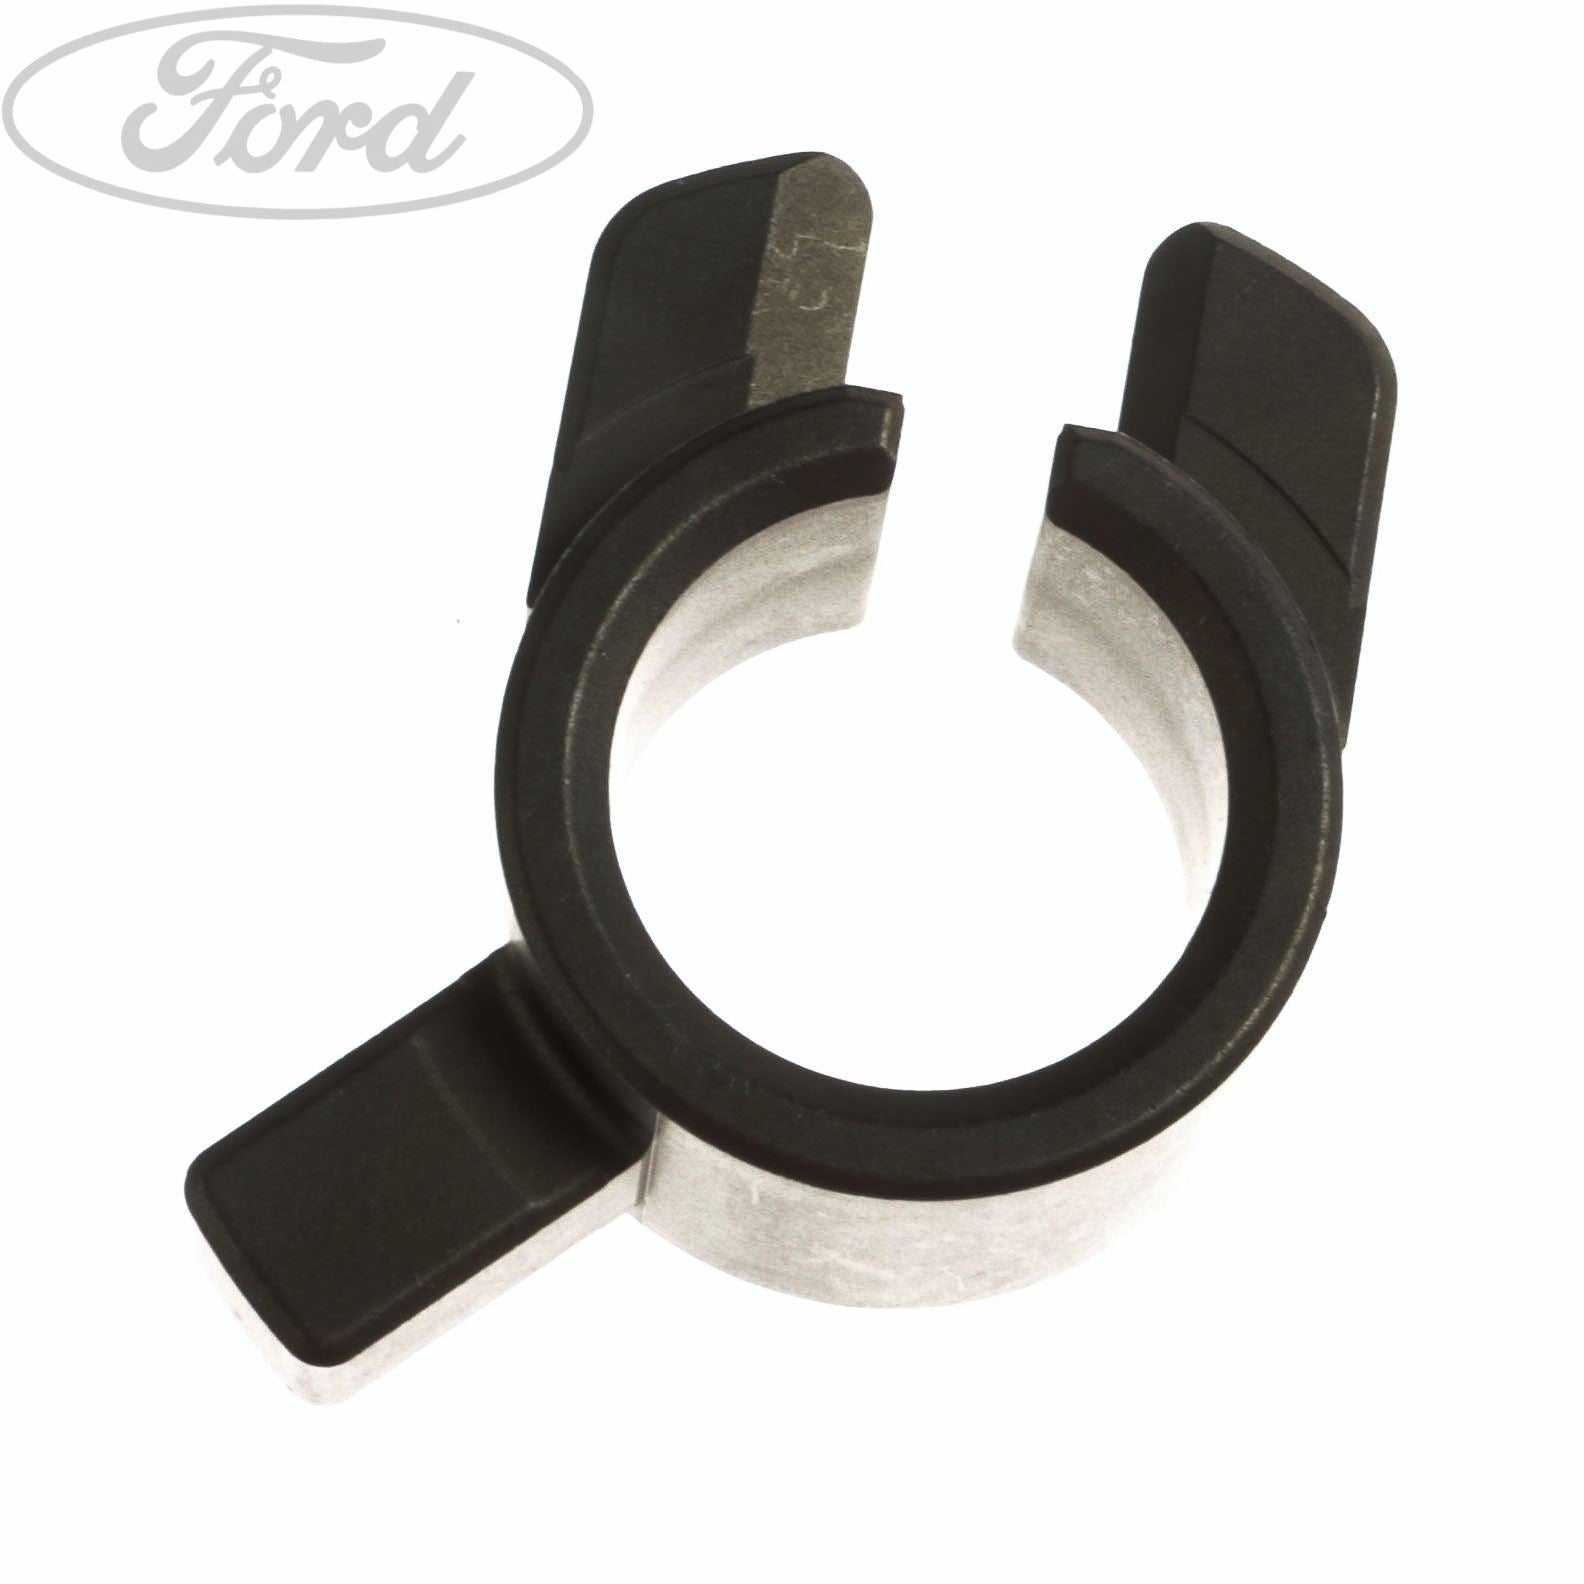 Ford, TRANSMISSION SELECTOR ARM SLEEVE